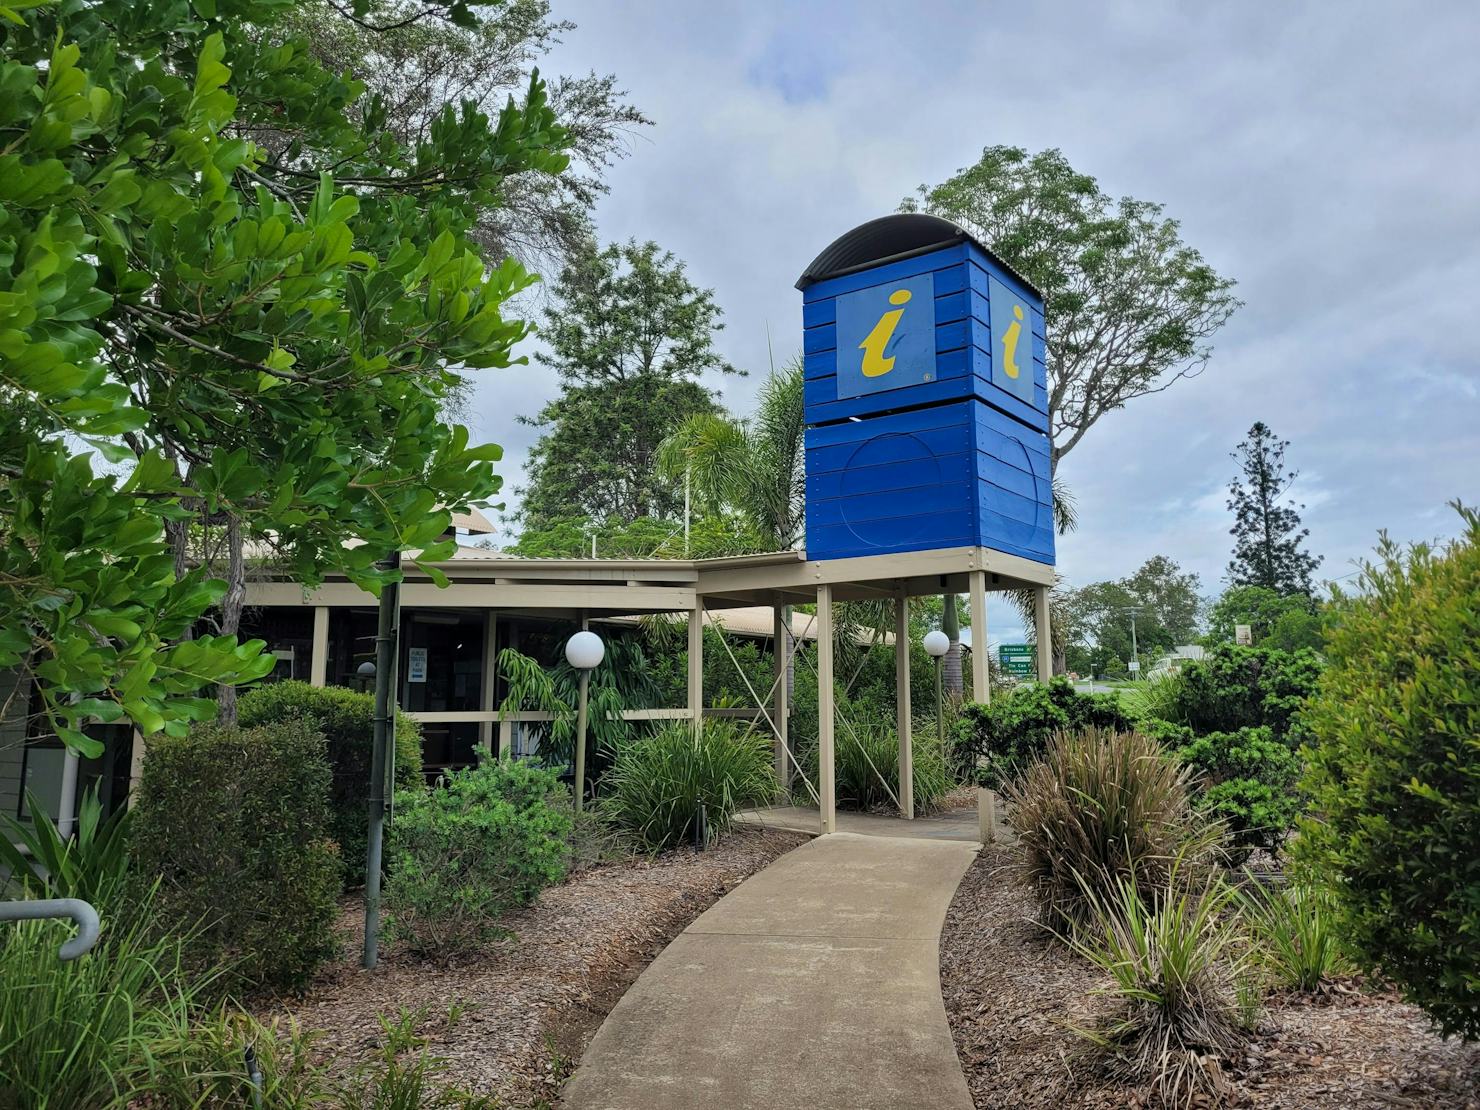 Gympie Explore and Visitor Information Centre